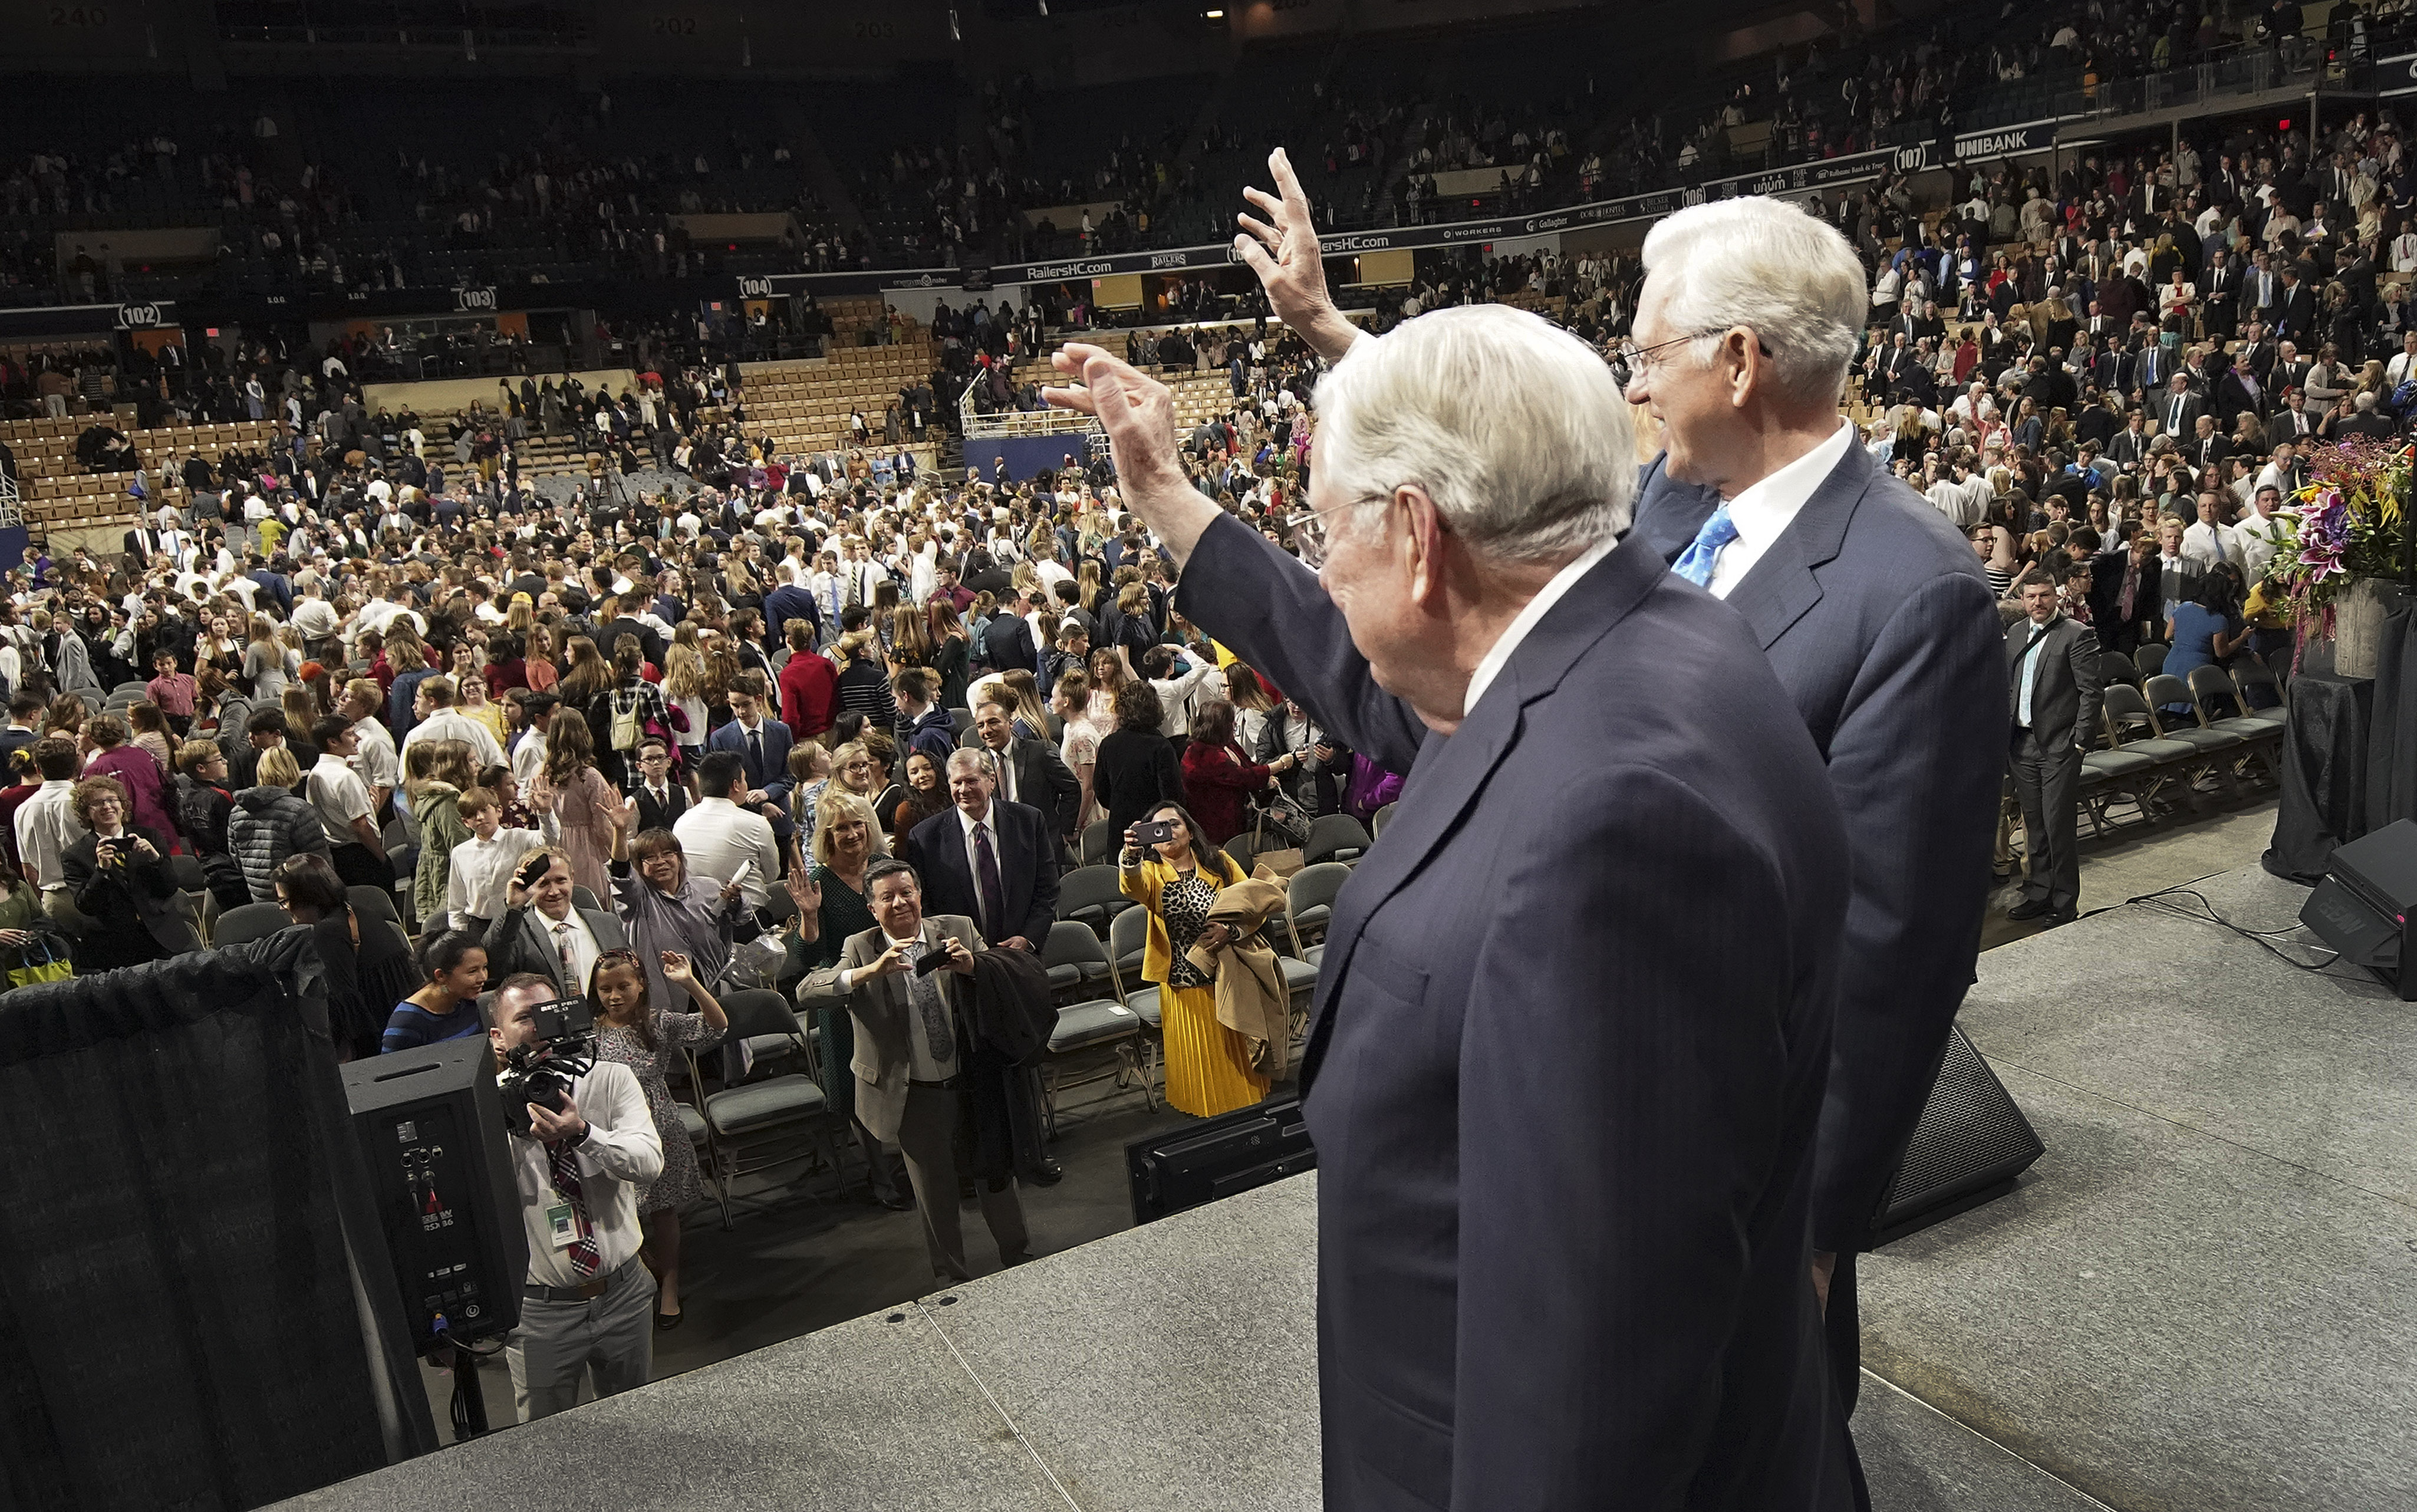 President M. Russell Ballard, acting president of the Quorum of the Twelve Apostles of The Church of Jesus Christ of Latter-day Saints, and Elder D. Todd Christofferson, of the Quorum of the Twelve Apostles, wave to attendees after a devotional in Worcester, Massachusetts, on Sunday, Oct. 20, 2019.